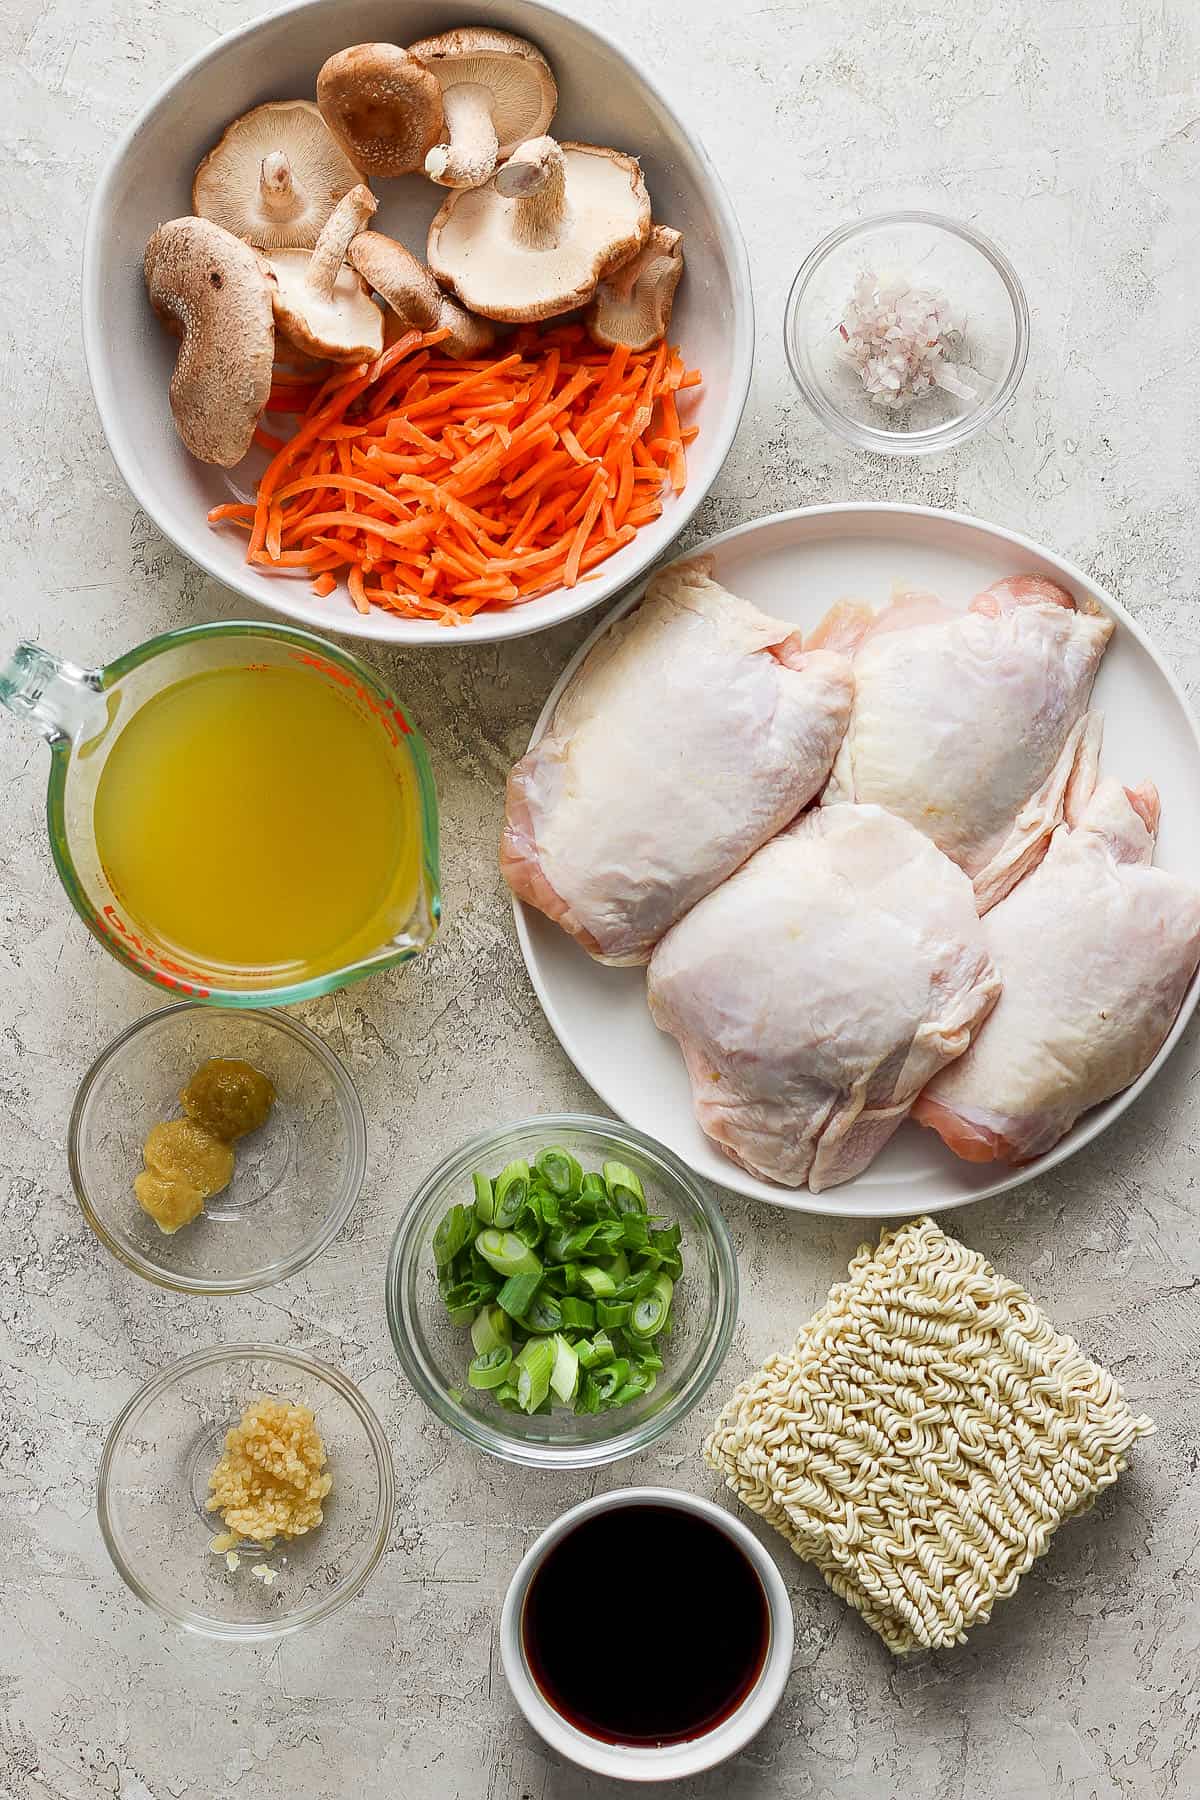 Ingredients for chicken ramen in separate bowls and plates.